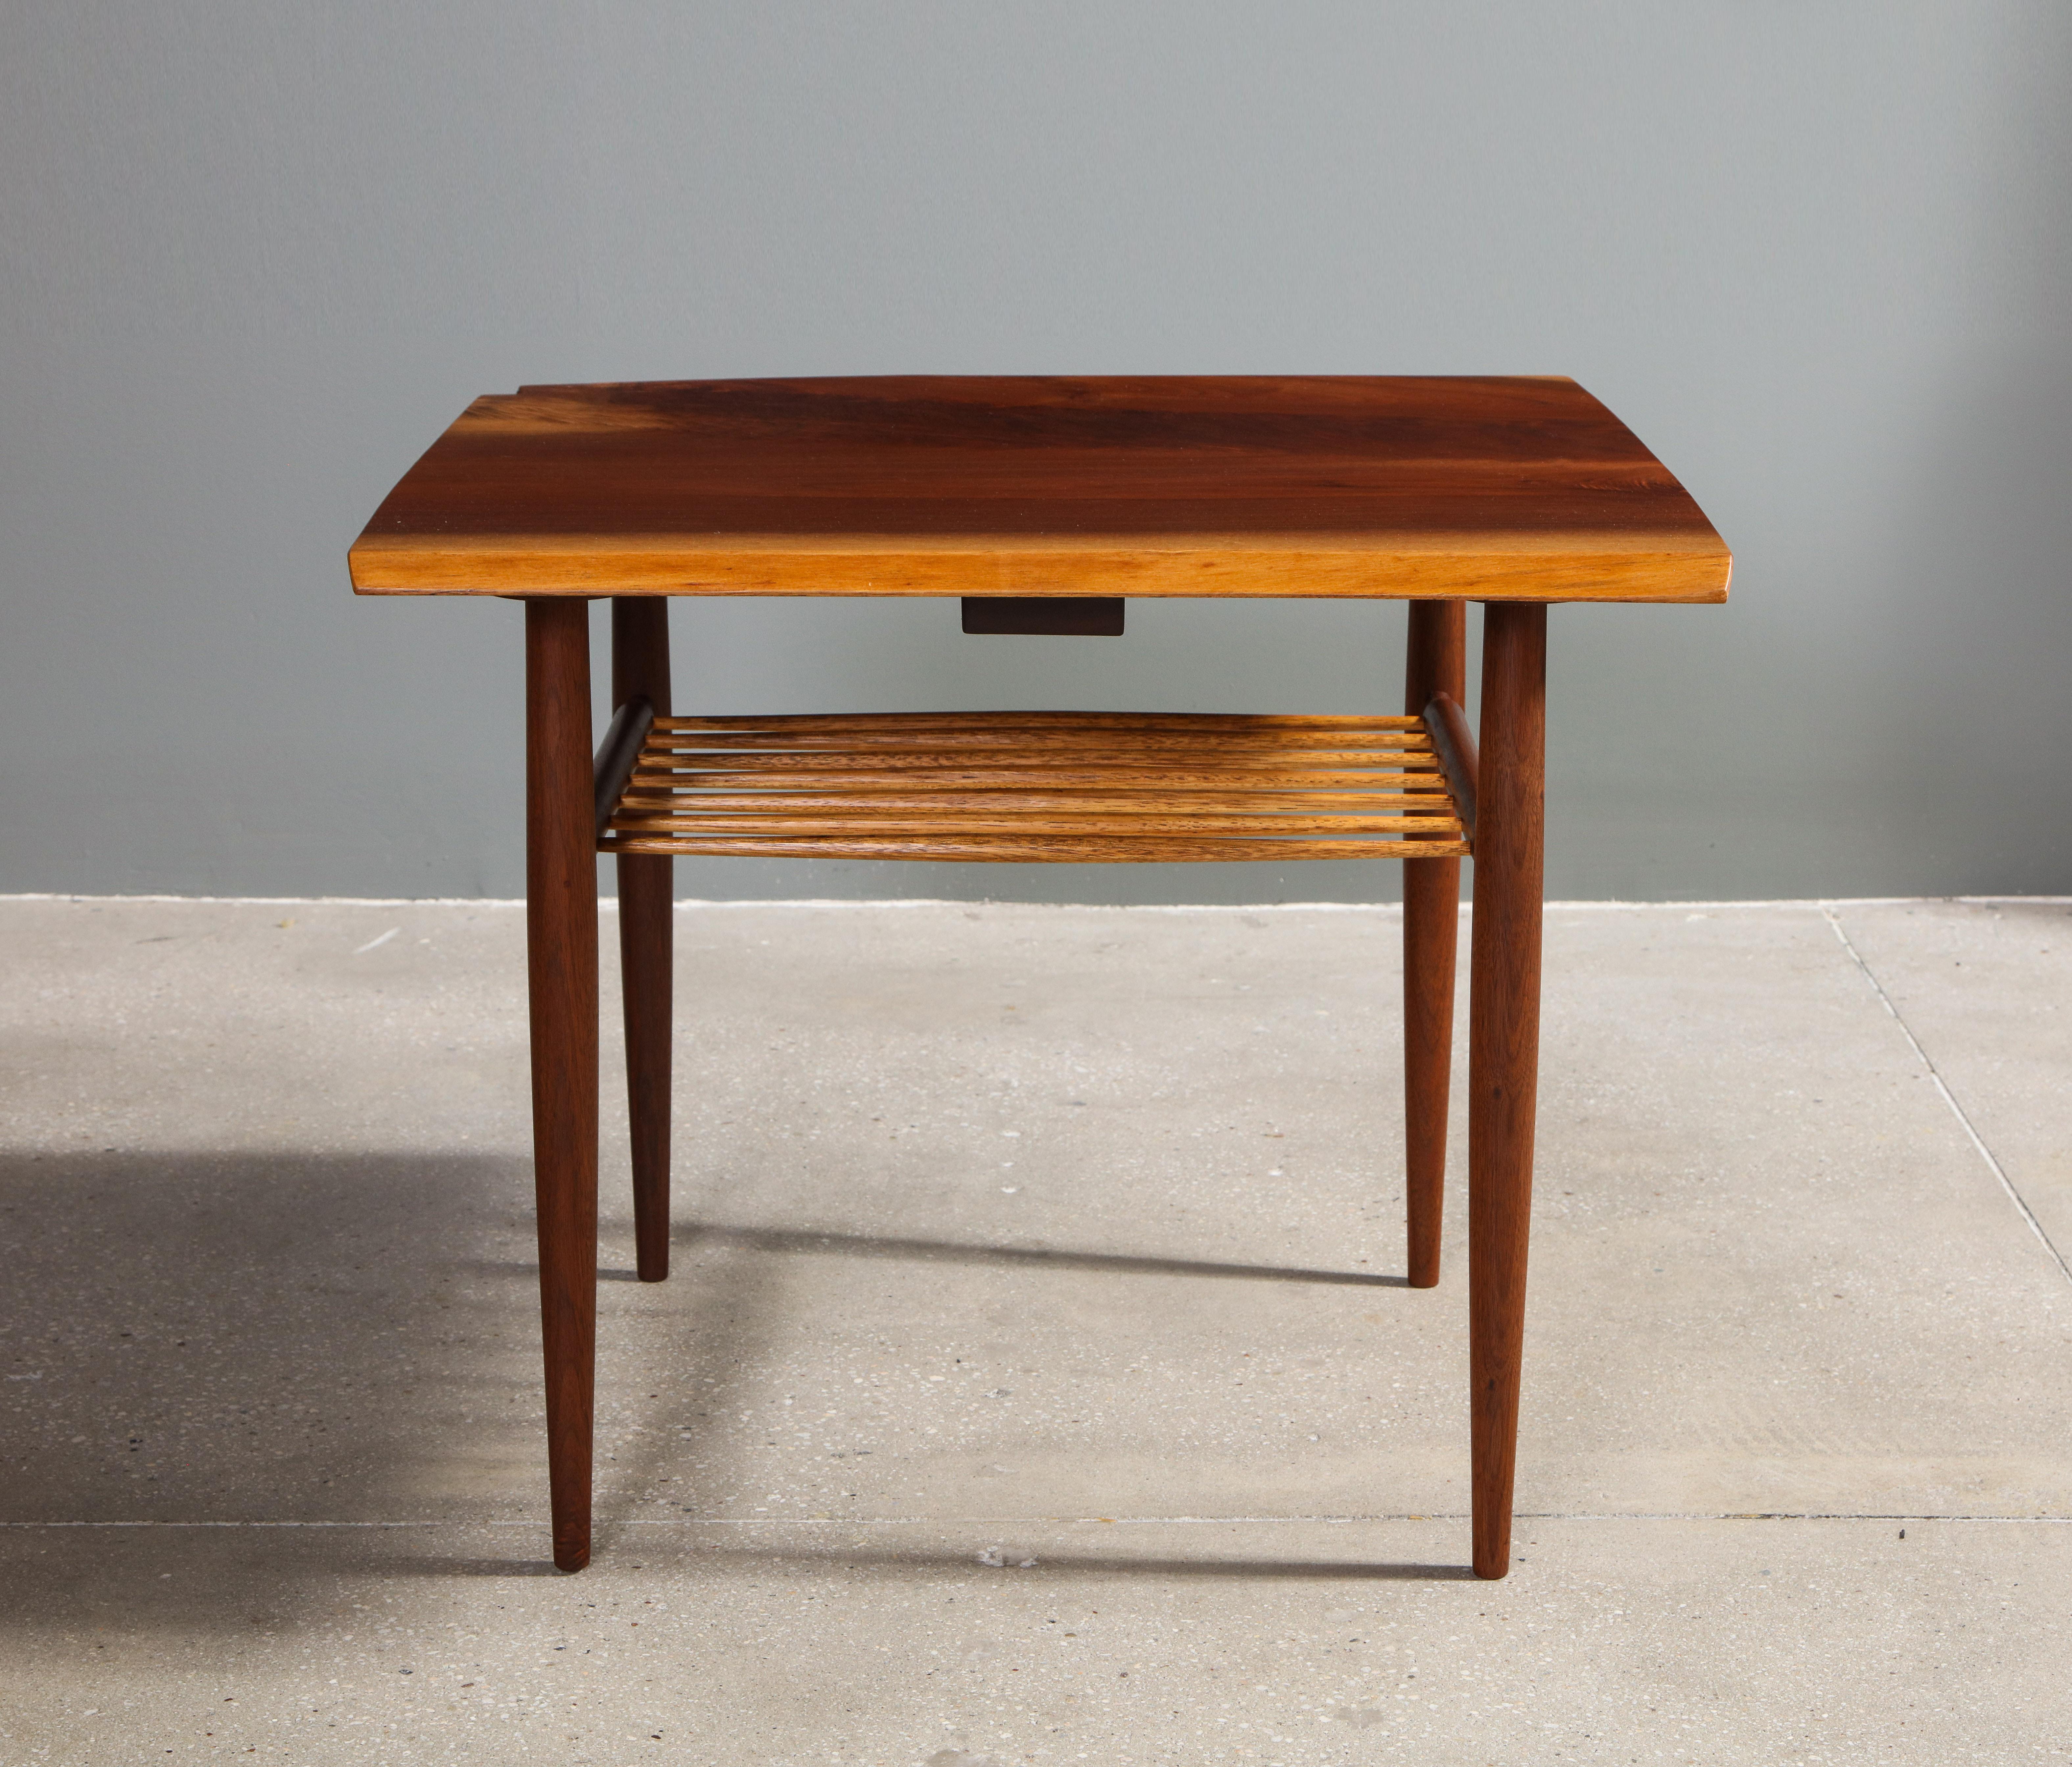 Mid-20th Century Walnut End Table with a Spindle Shelf, by George Nakashima